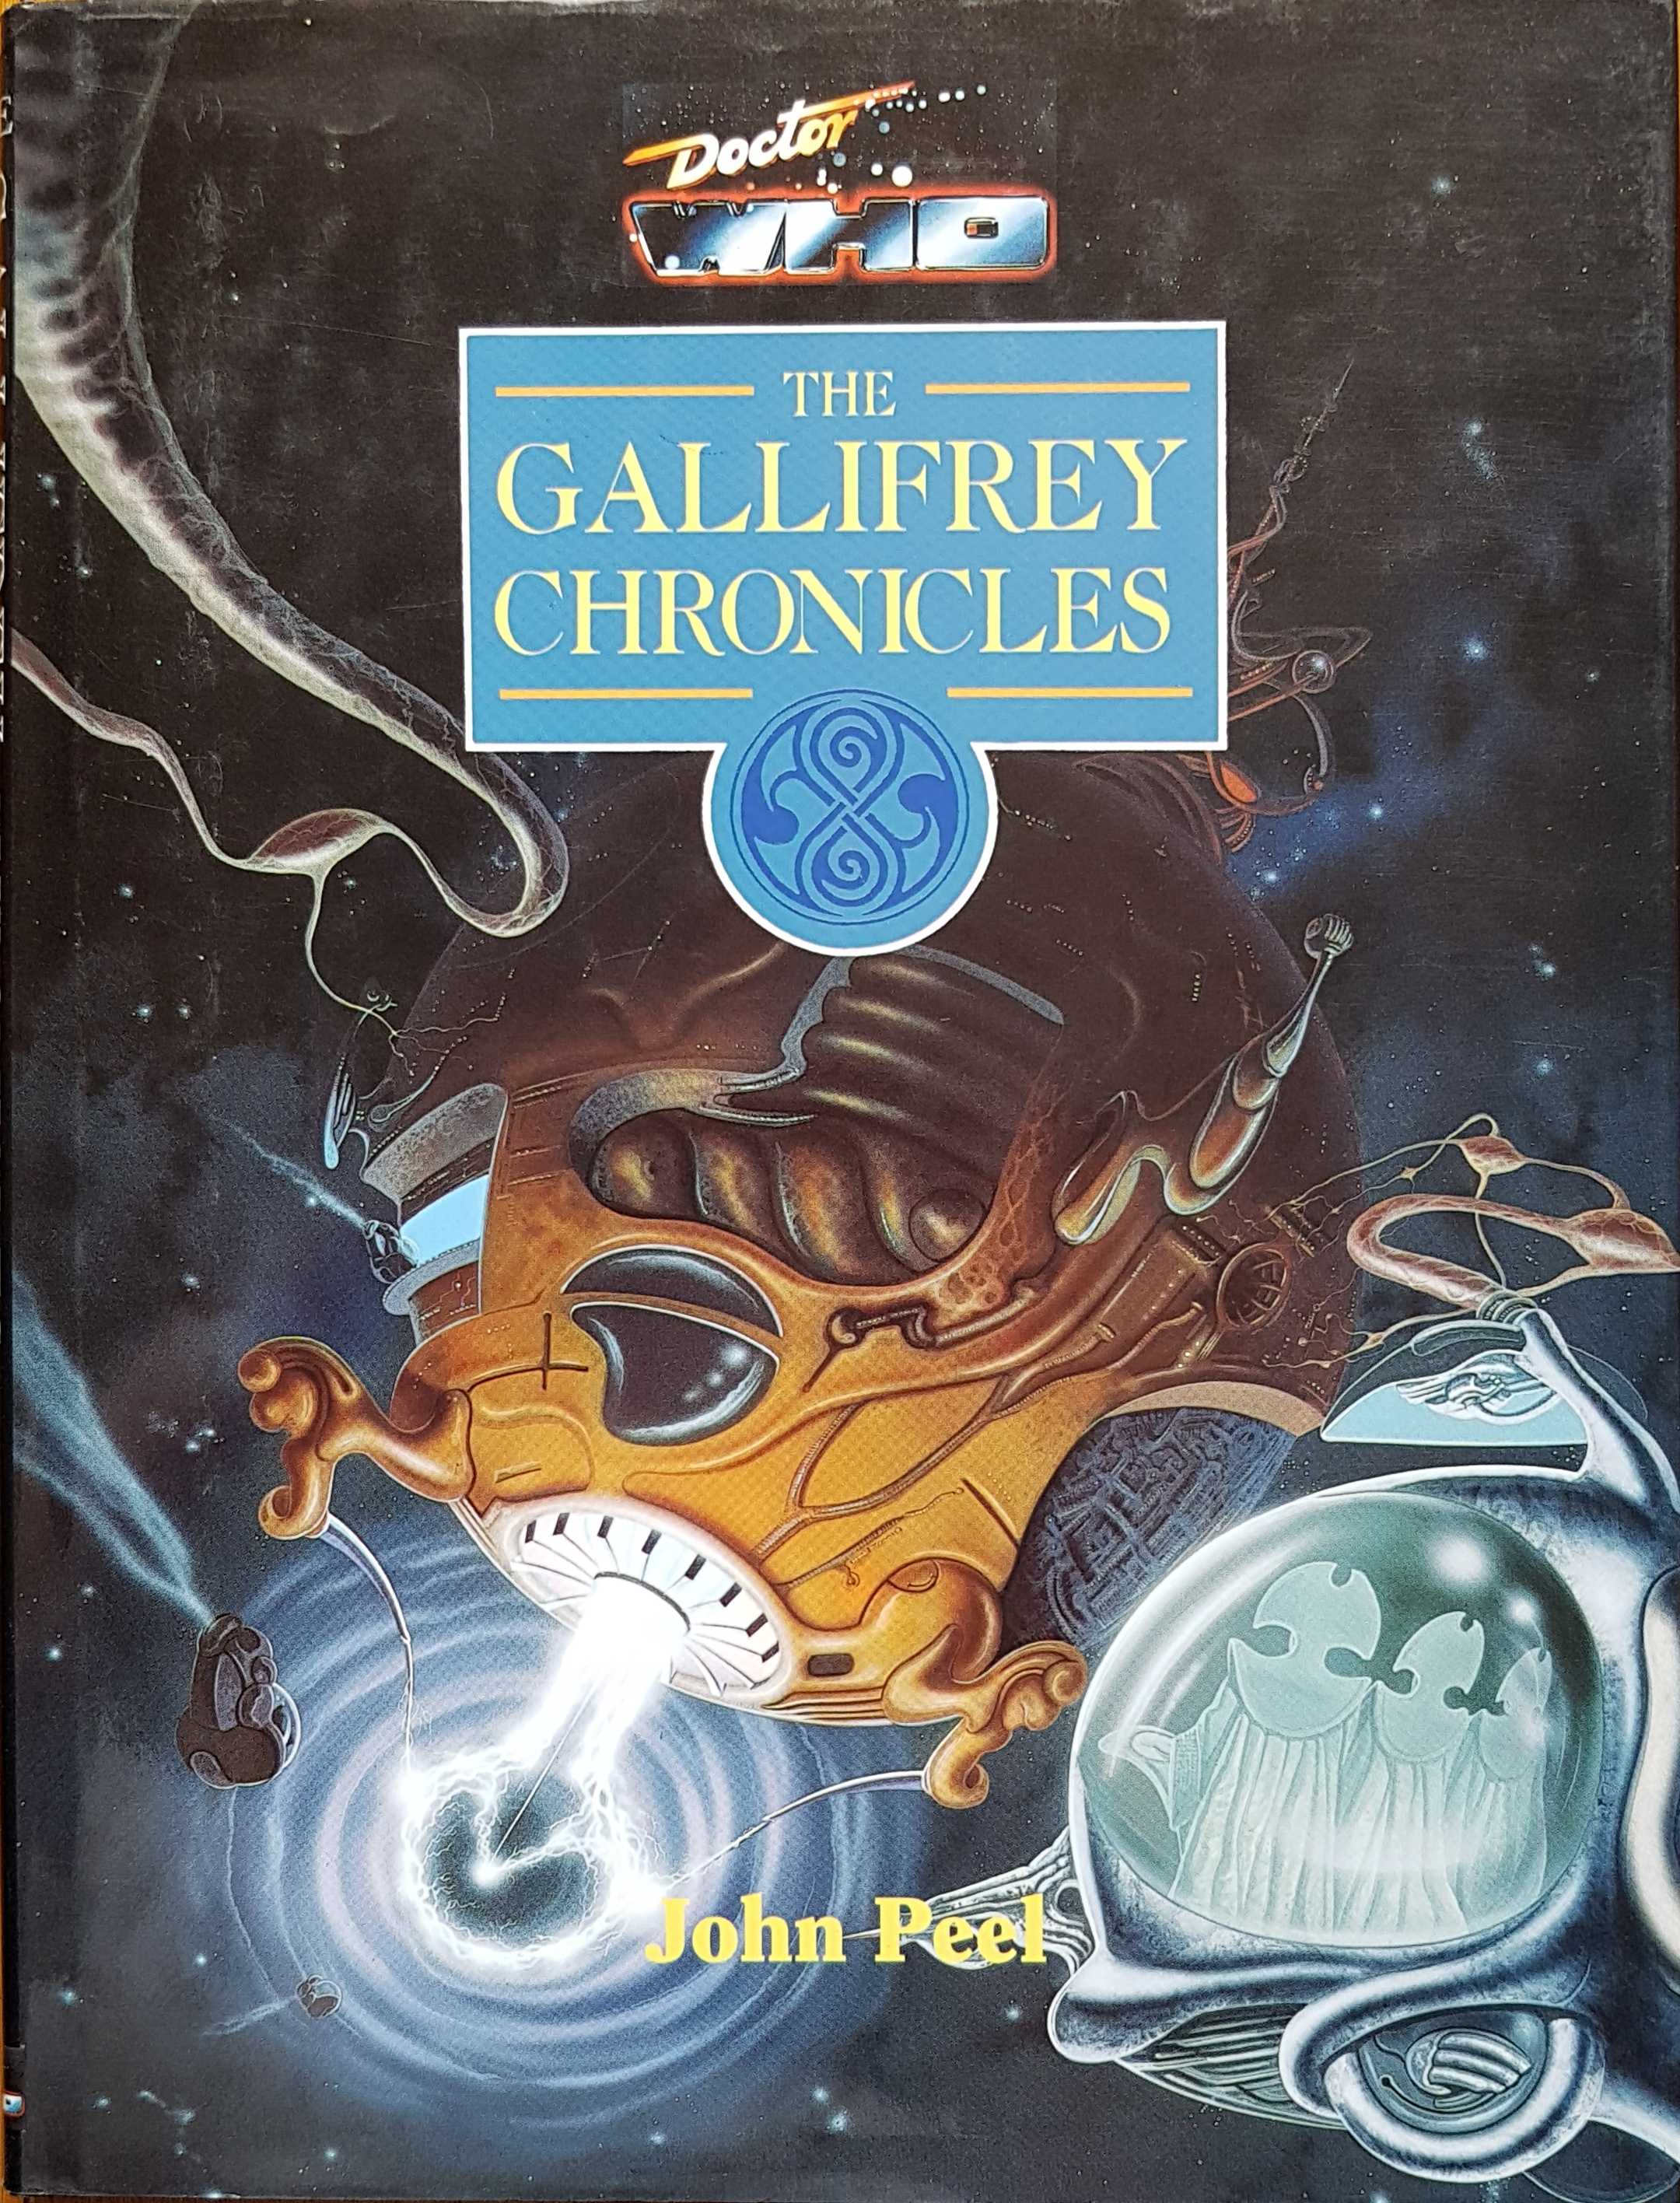 Picture of 1-85227-329-1 Doctor Who - The Gallifrey chronicles by artist John Peel from the BBC records and Tapes library